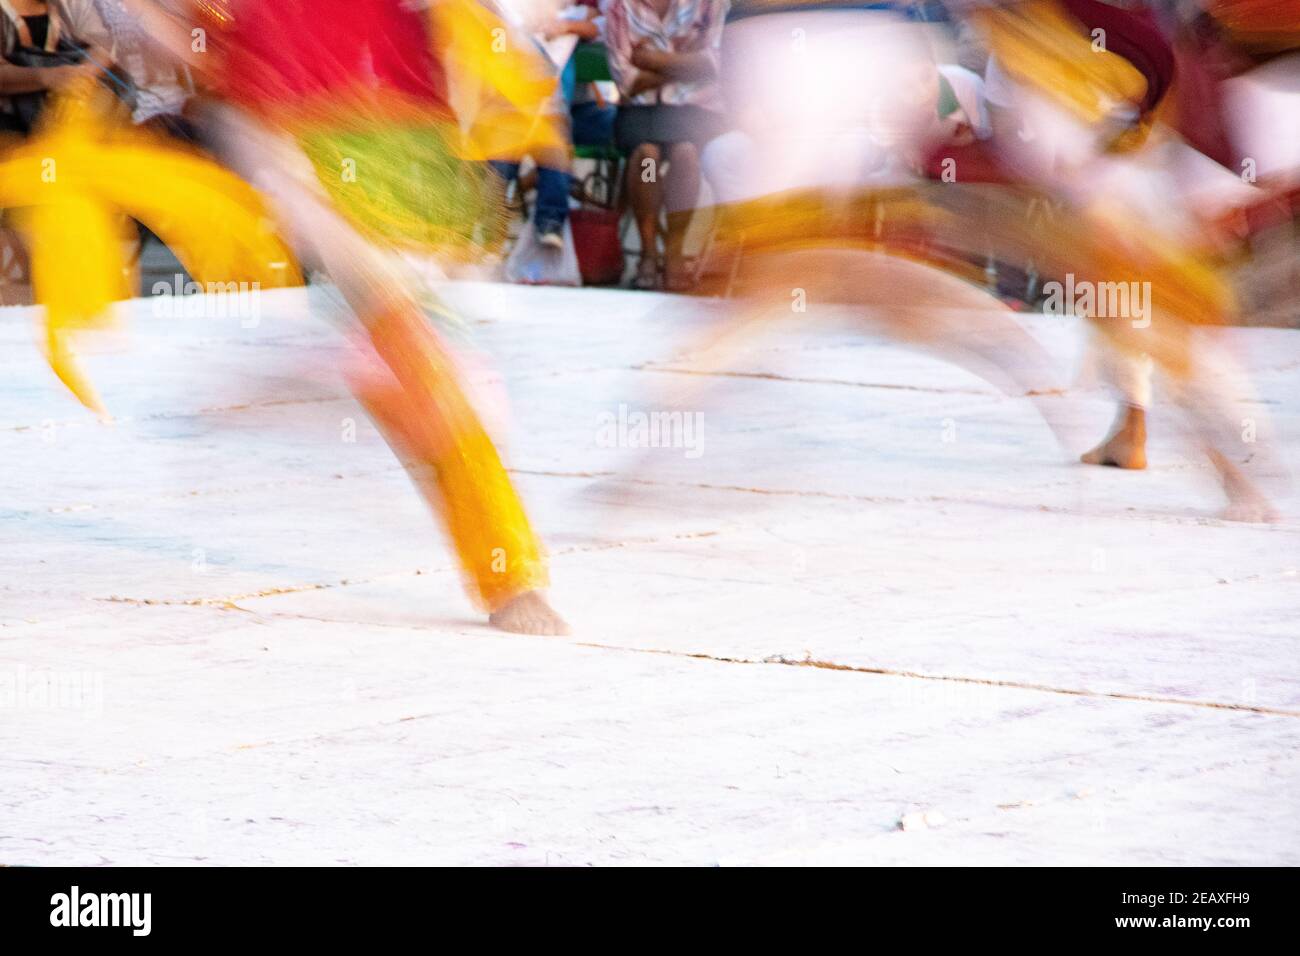 A group of dancers put on an exhibition showcasing various Indigenous tribes dance customs Stock Photo